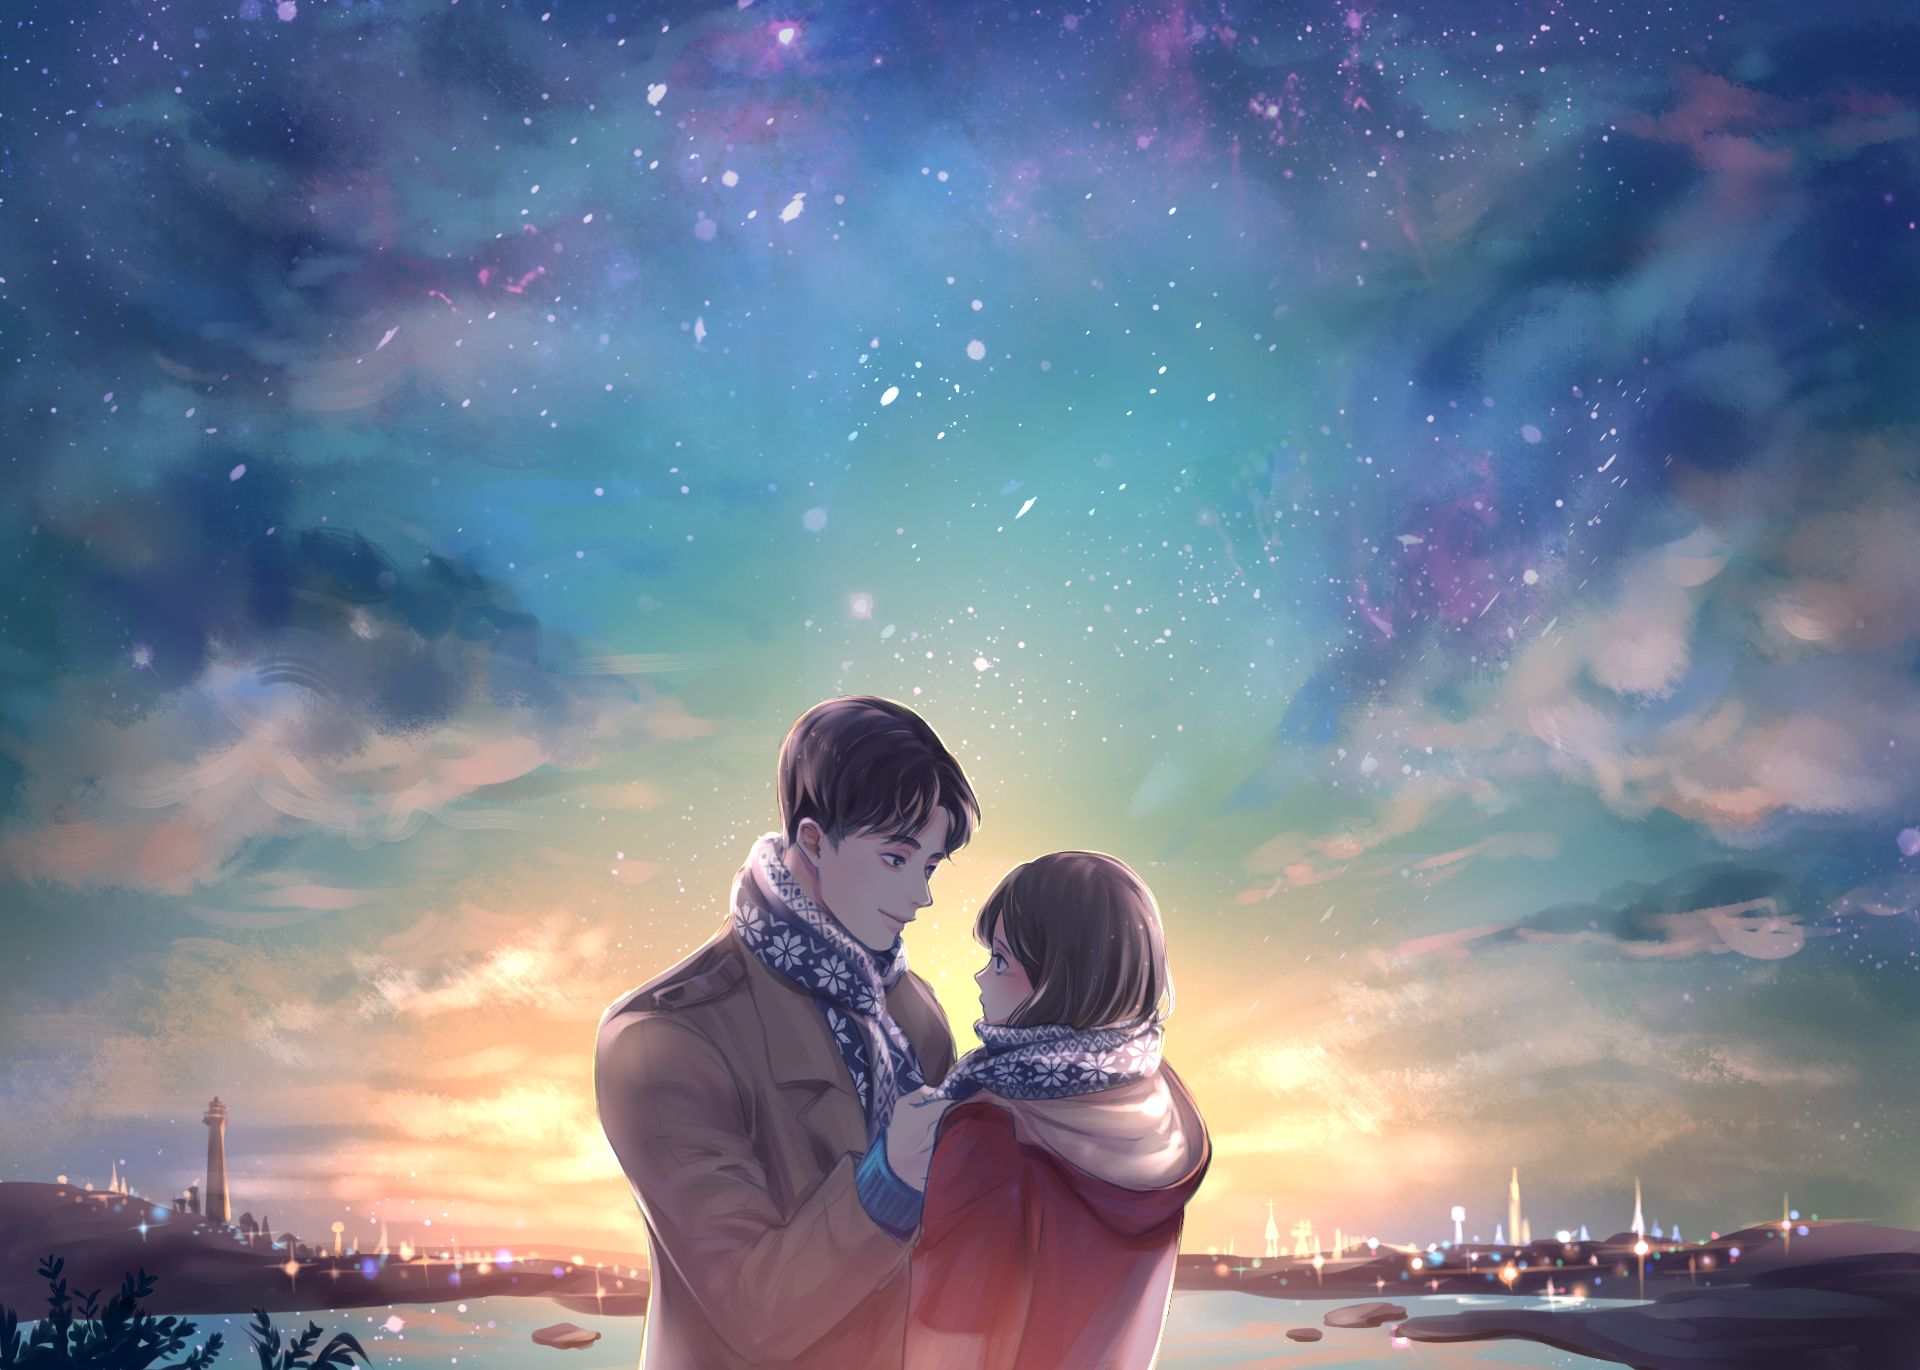 Download Anime Couple Kiss Under Starry Night Sky Wallpaper